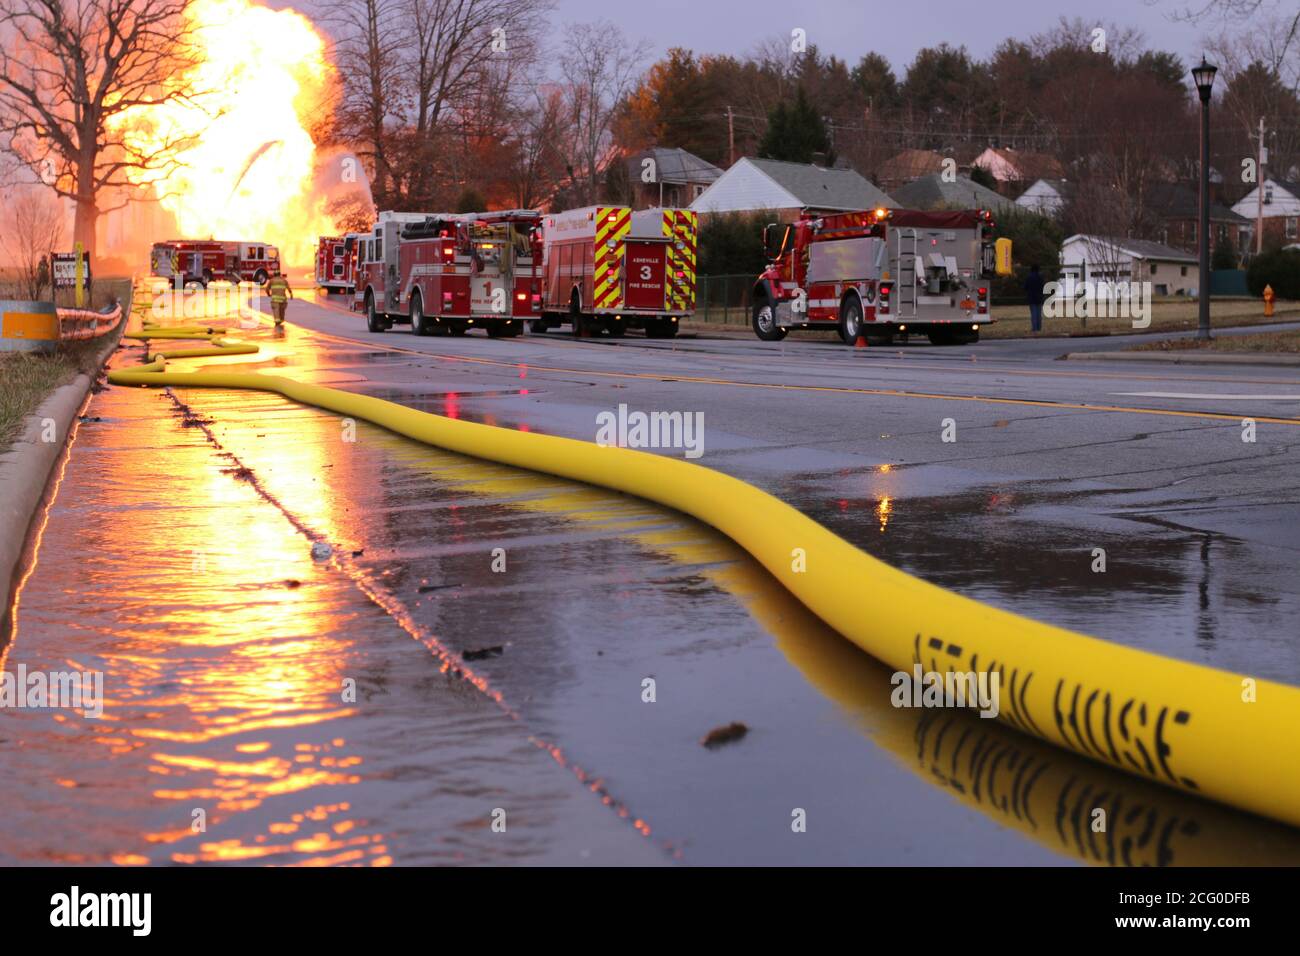 A fire hose supplies water for containment of a fire that resulted from a gas line rupture Stock Photo